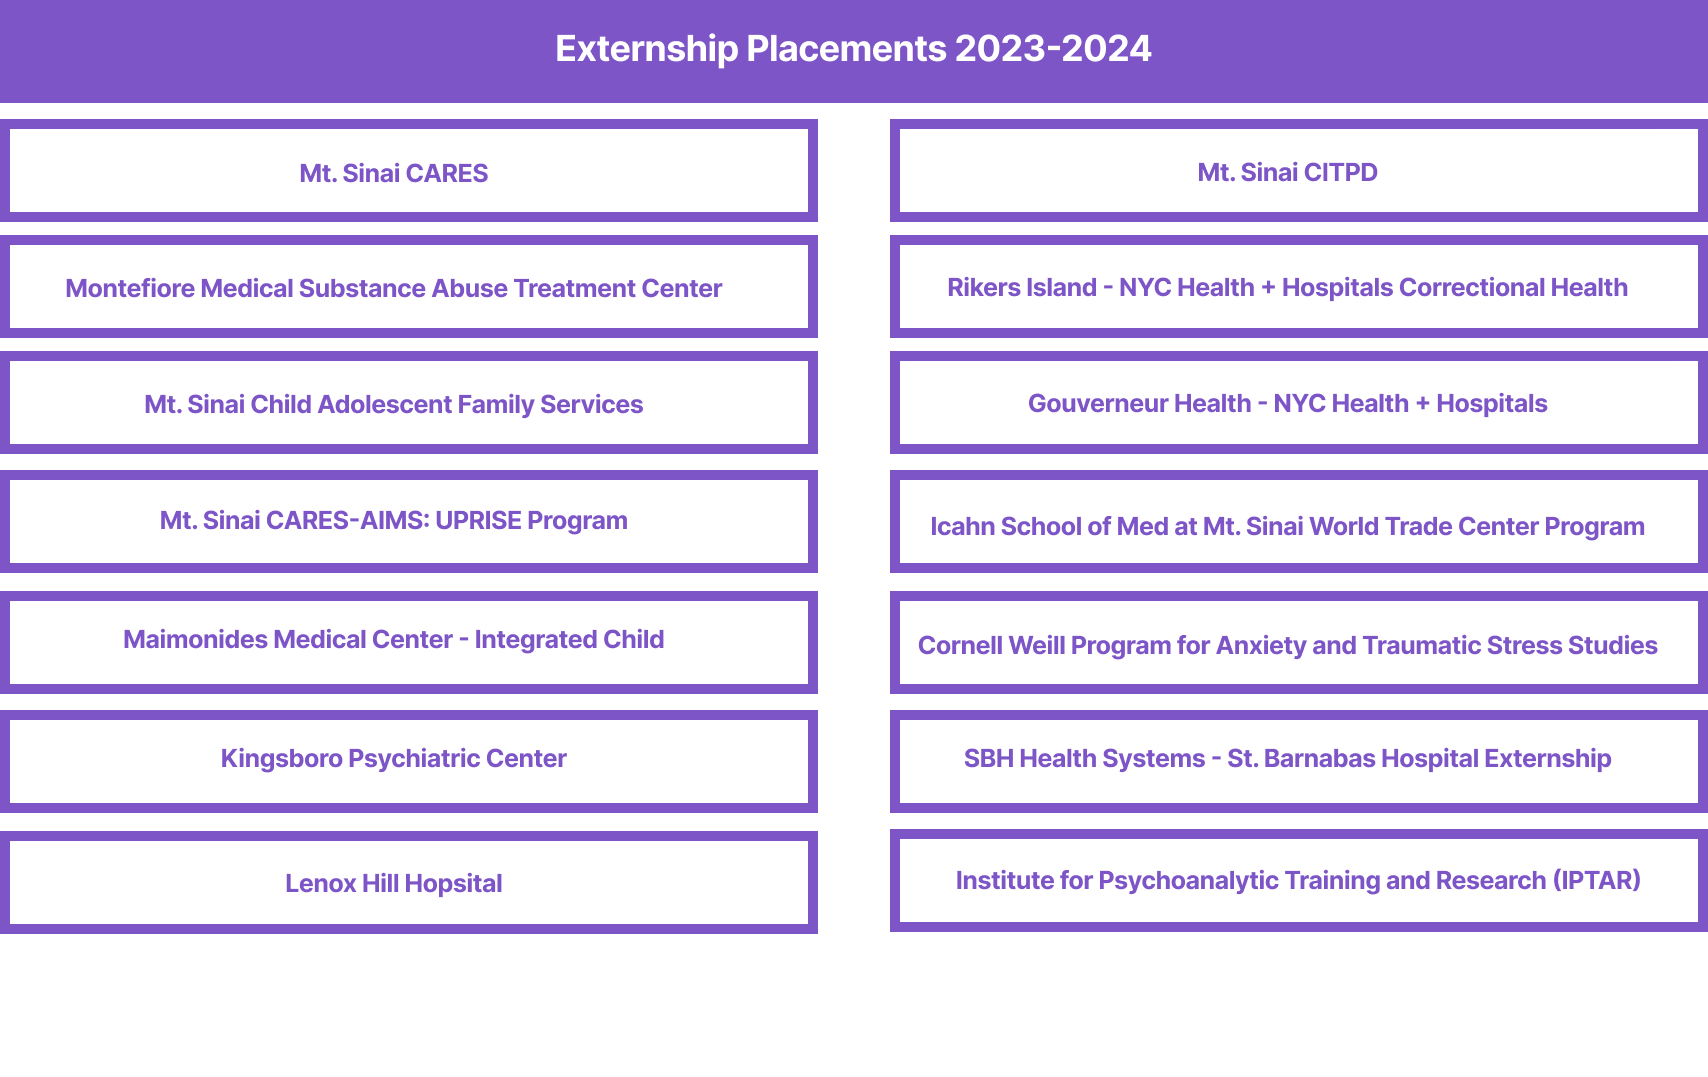 Externship Placements 2023-2024: Mt. Sinai CARES, Mt. Sinai CITPD, Montefiore Medical Substance Abuse Treatment Center, Rikers Island - NYC Health + Hospitals Correctional Health, Mt. Sinai Child Adolescent Family Services, Gouverneur Health - NYC Health + Hospitals, Mt. Sinai CARES-AIMS: UPRISE Program, Icahn School of Med at Mt. Sinai World Trade Center Program, Maimonides Medical Center - Integrated Child, Cornell Weill Program for Anxiety and Traumatic Stress Studies, Kingsboro Psychiatric Center, SBH H